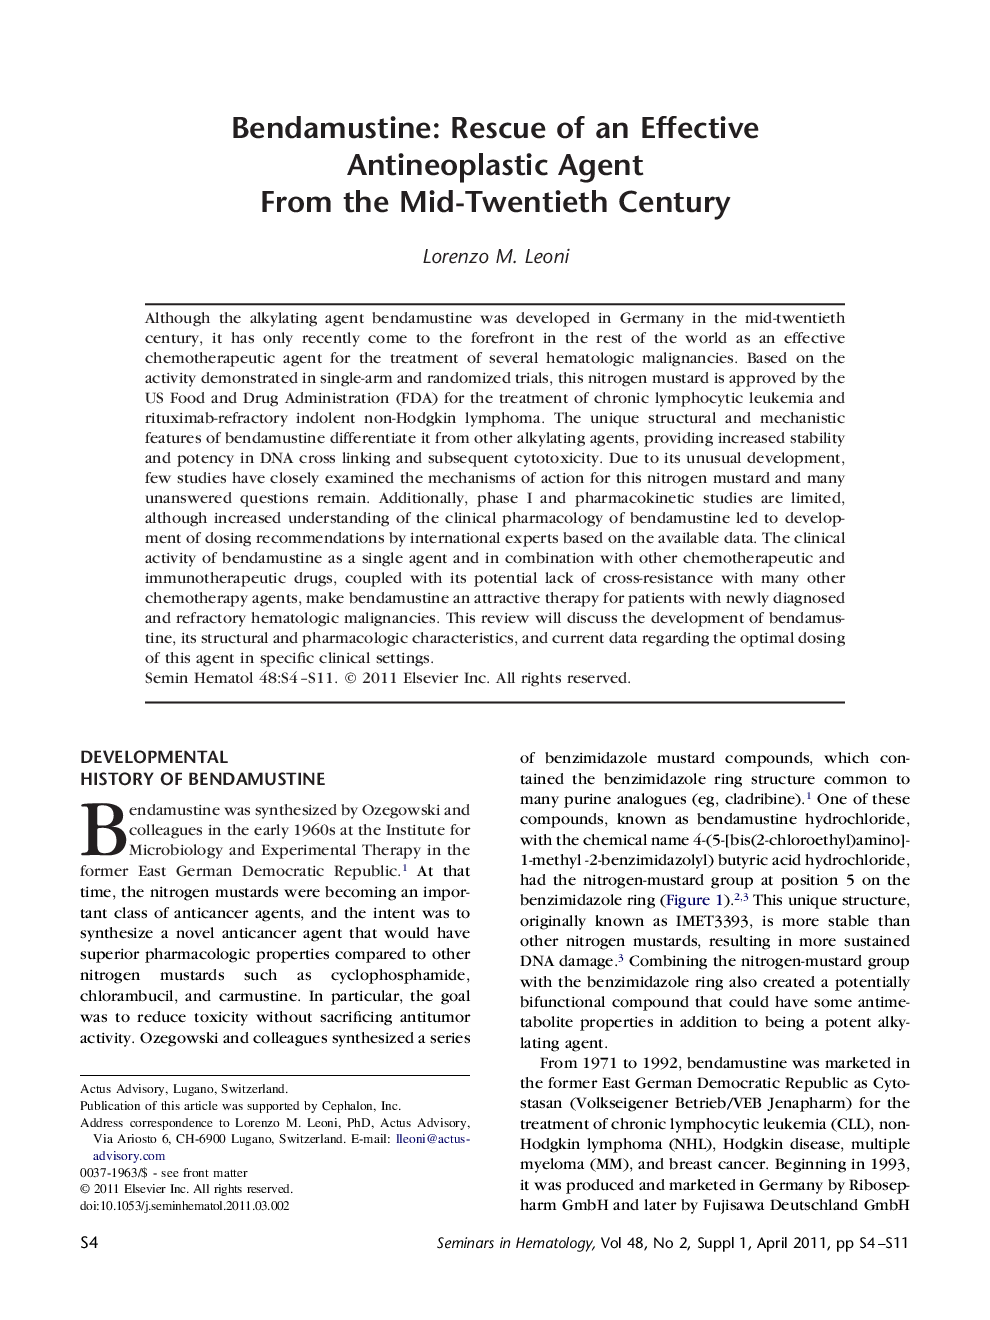 Bendamustine: Rescue of an Effective Antineoplastic Agent From the Mid-Twentieth Century